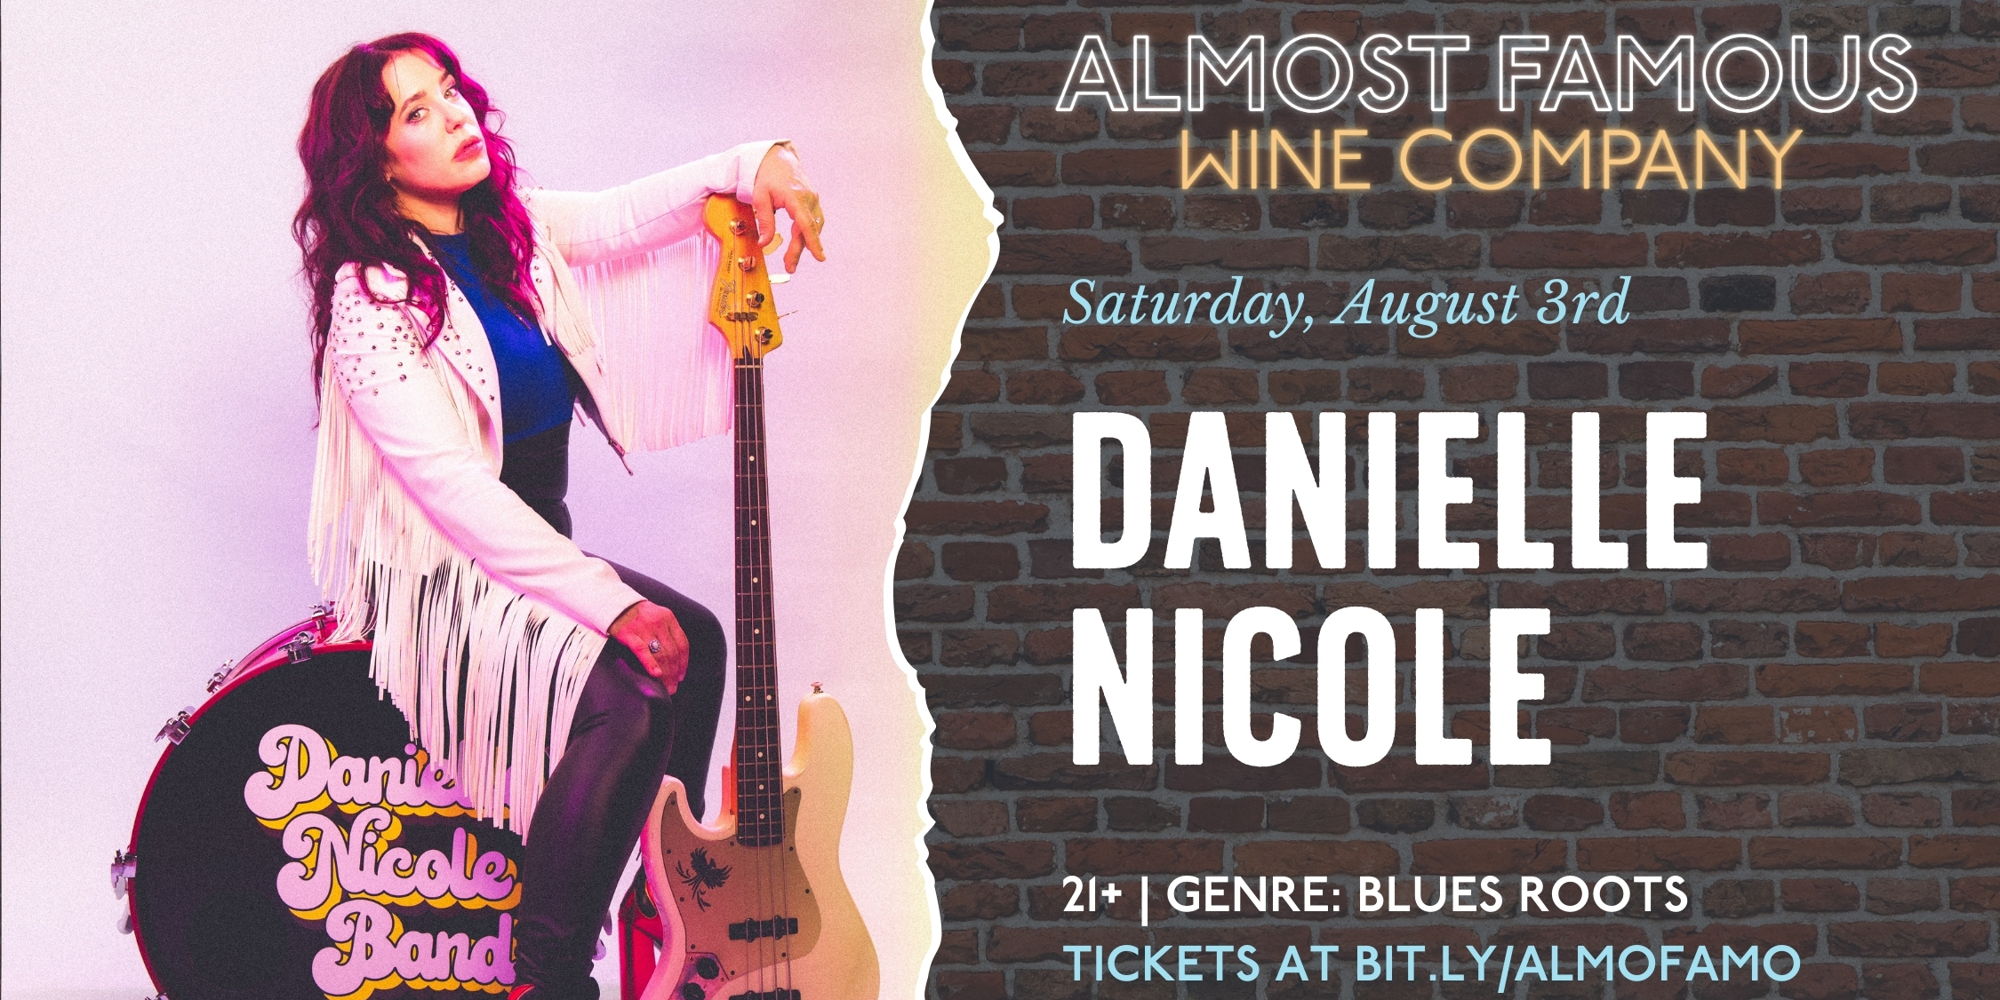 Grammy-nominated Blues Roots artist Danielle Nicole at Almost Famous promotional image